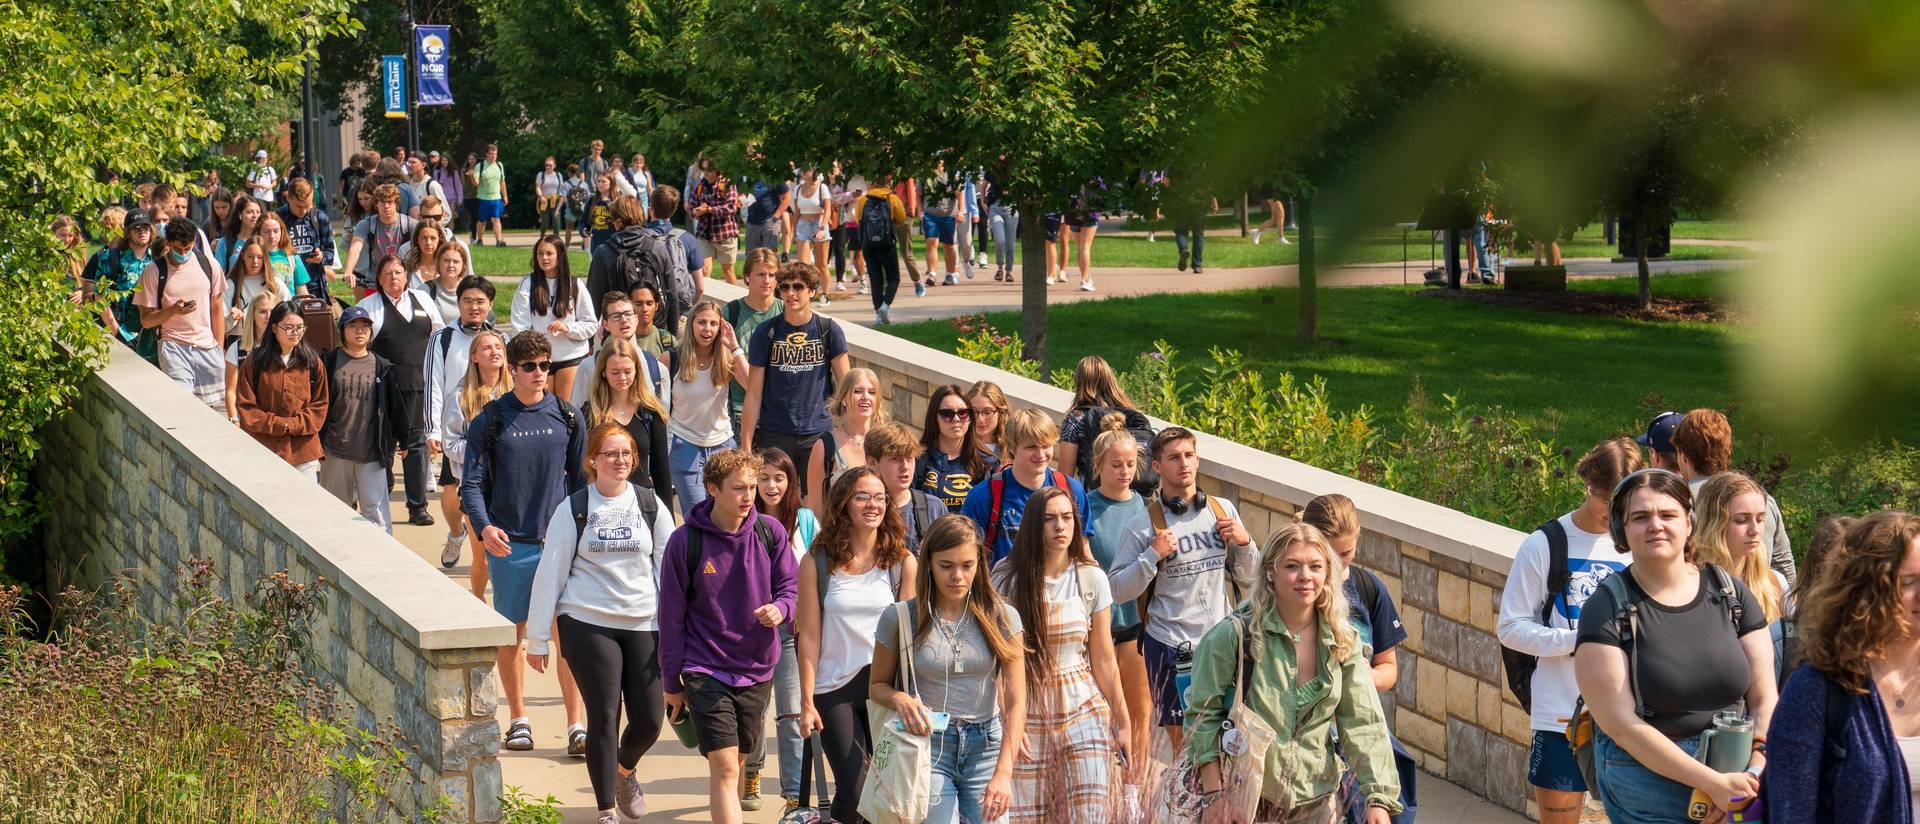 Students make their way through lower campus on a warm summer.